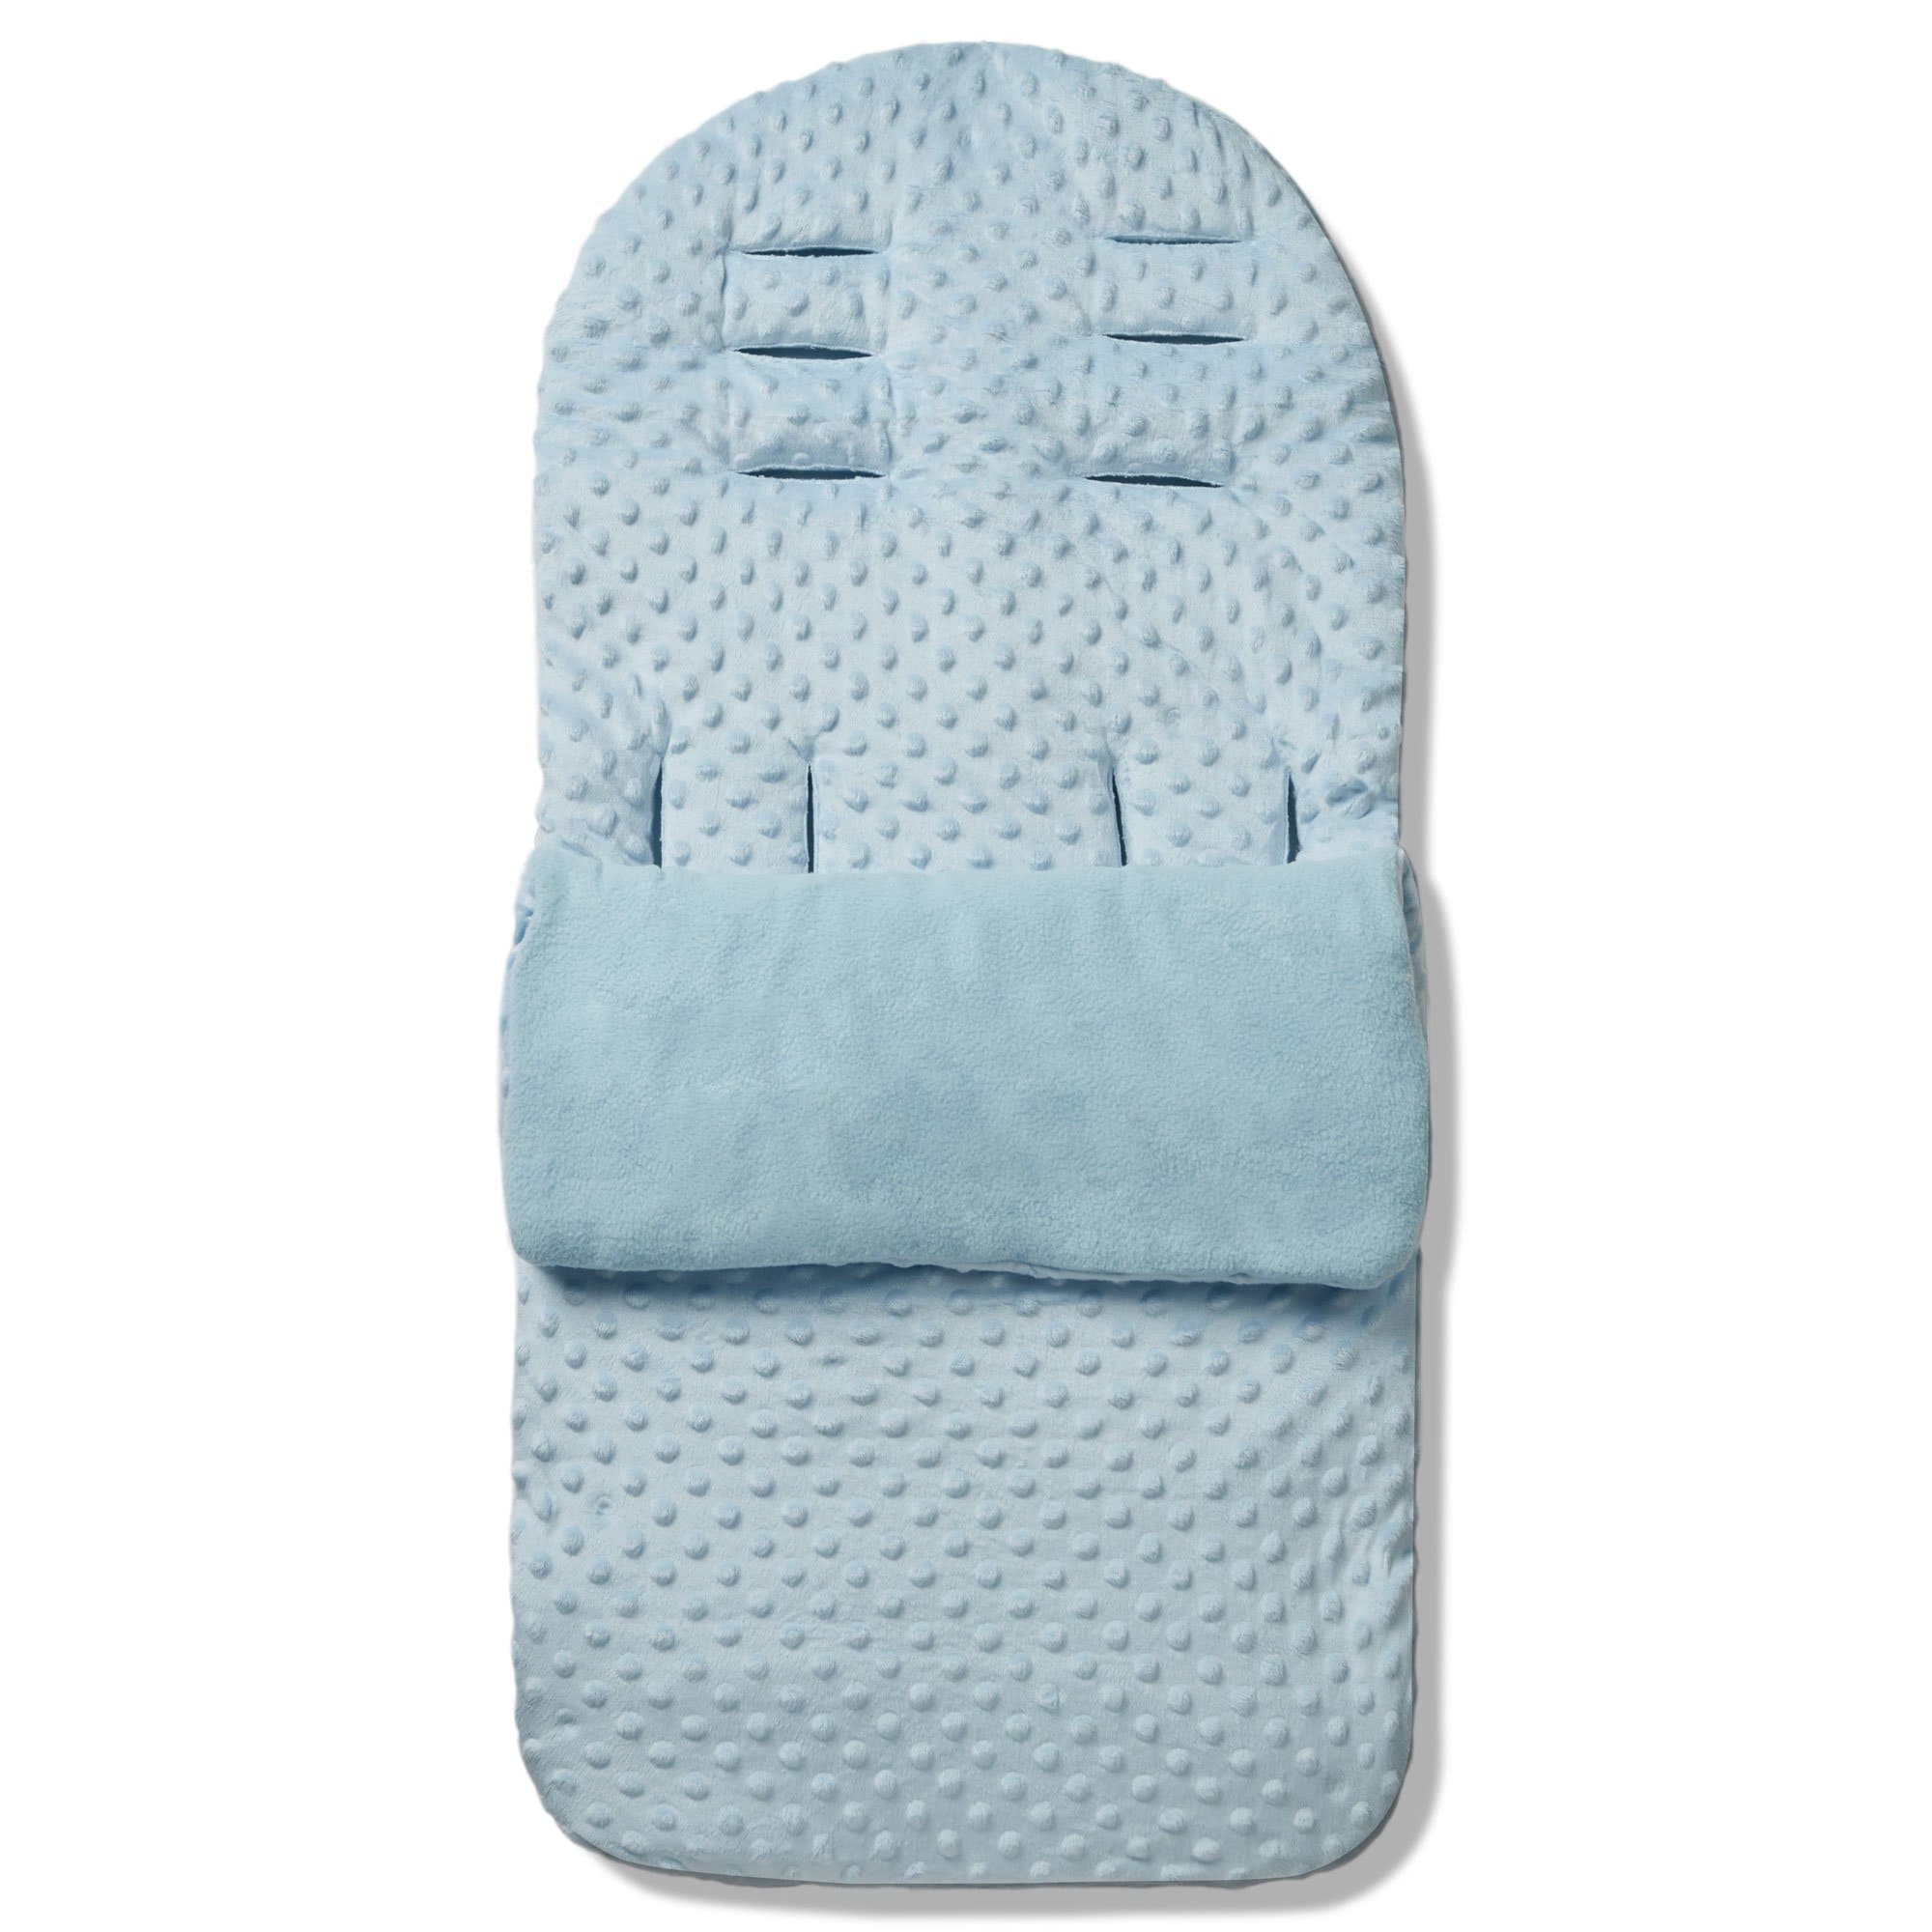 Dimple Footmuff / Cosy Toes Compatible with BabyDan - For Your Little One